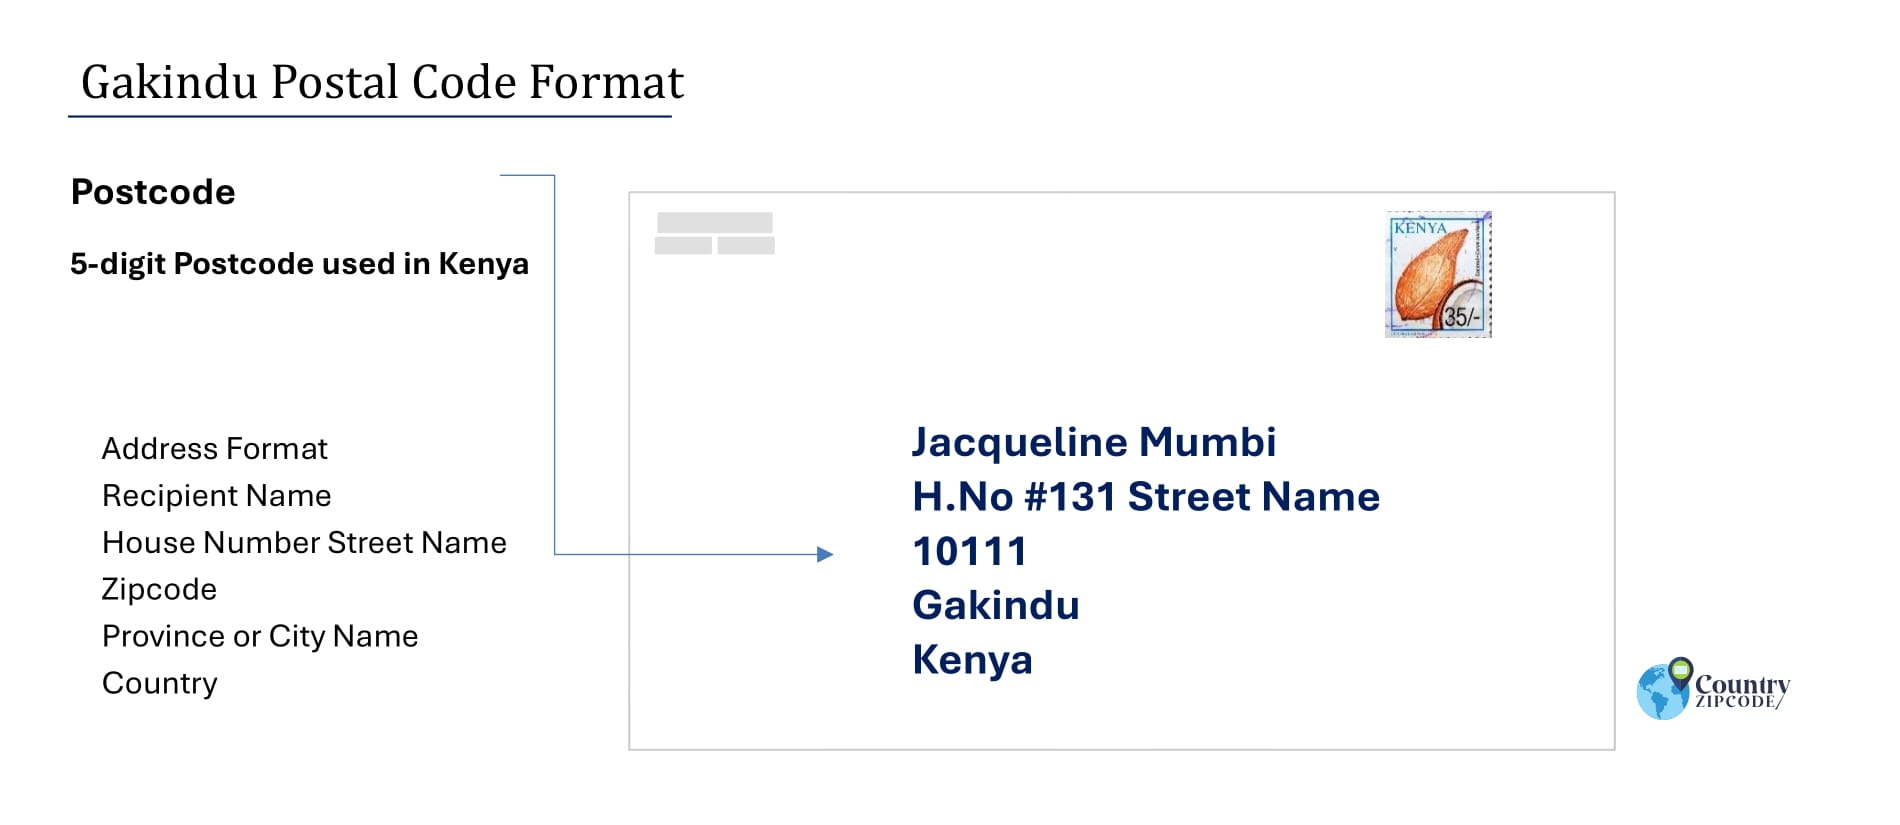 Example of Gakindu Address and postal code format